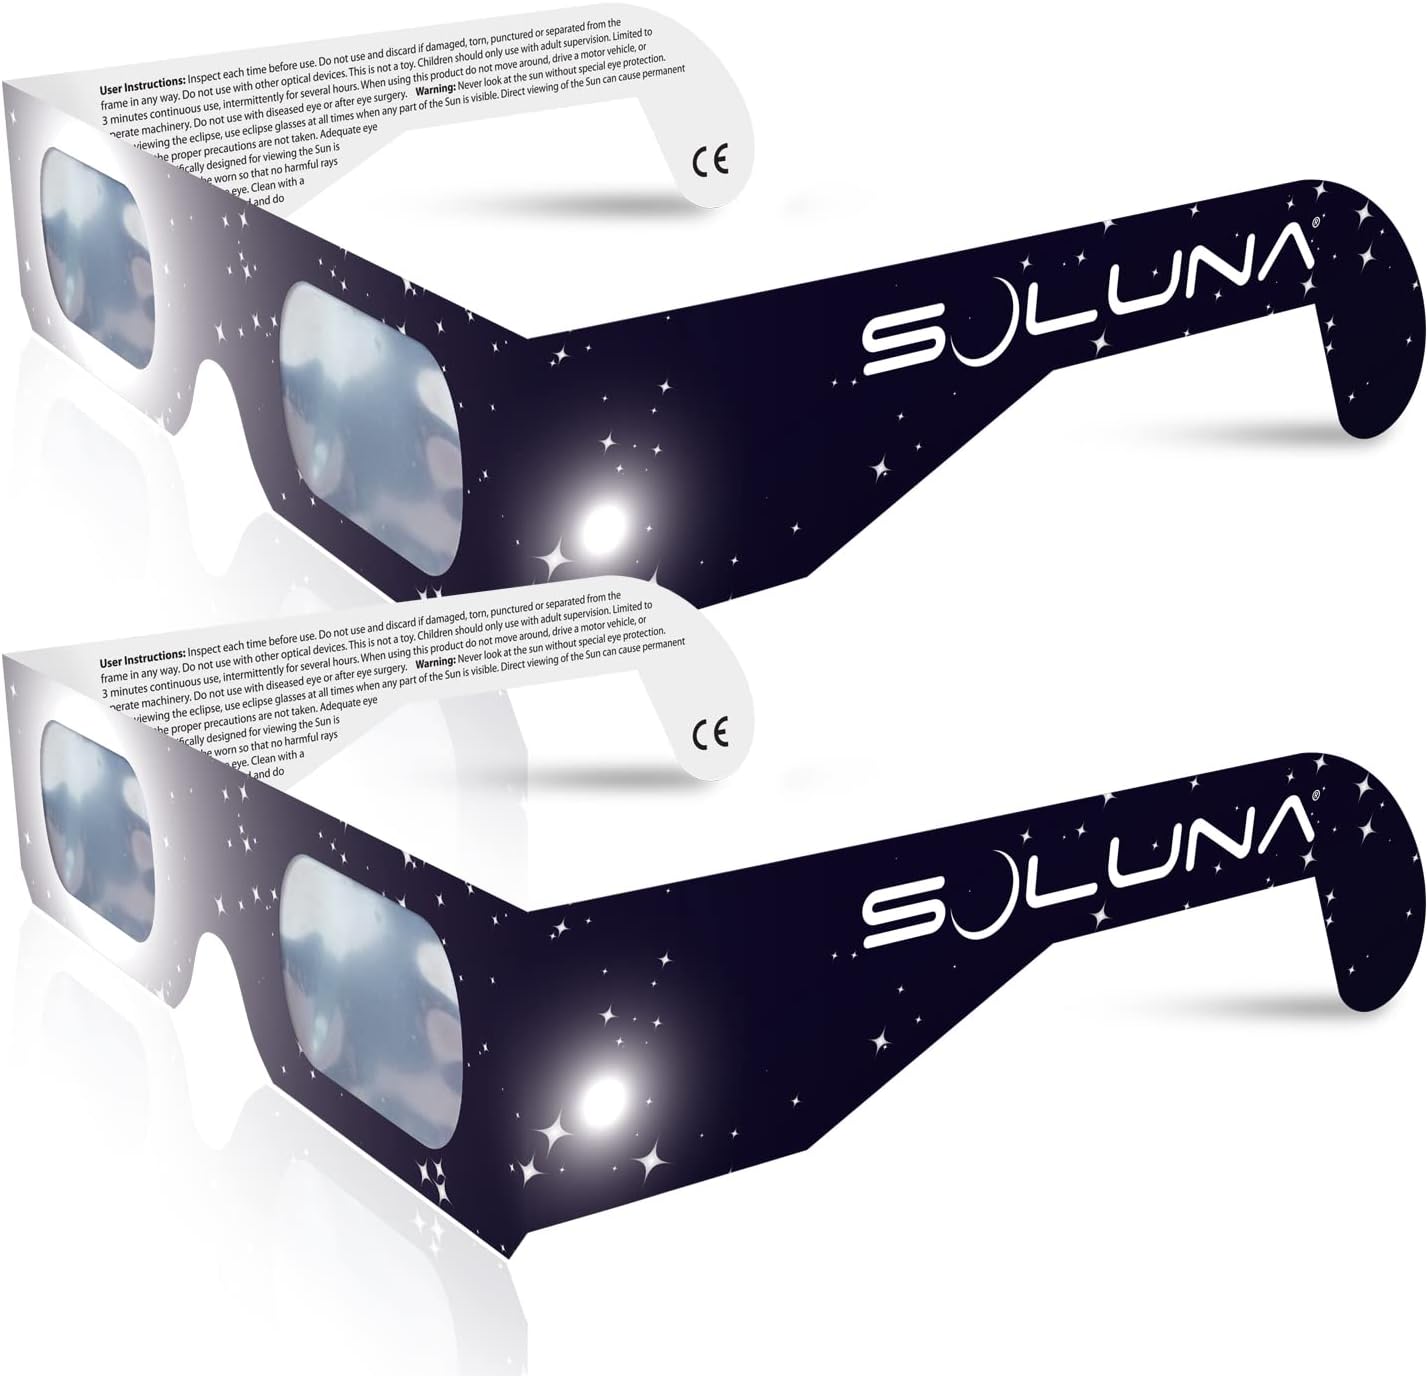 Solar Eclipse Glasses AAS Approved 2024